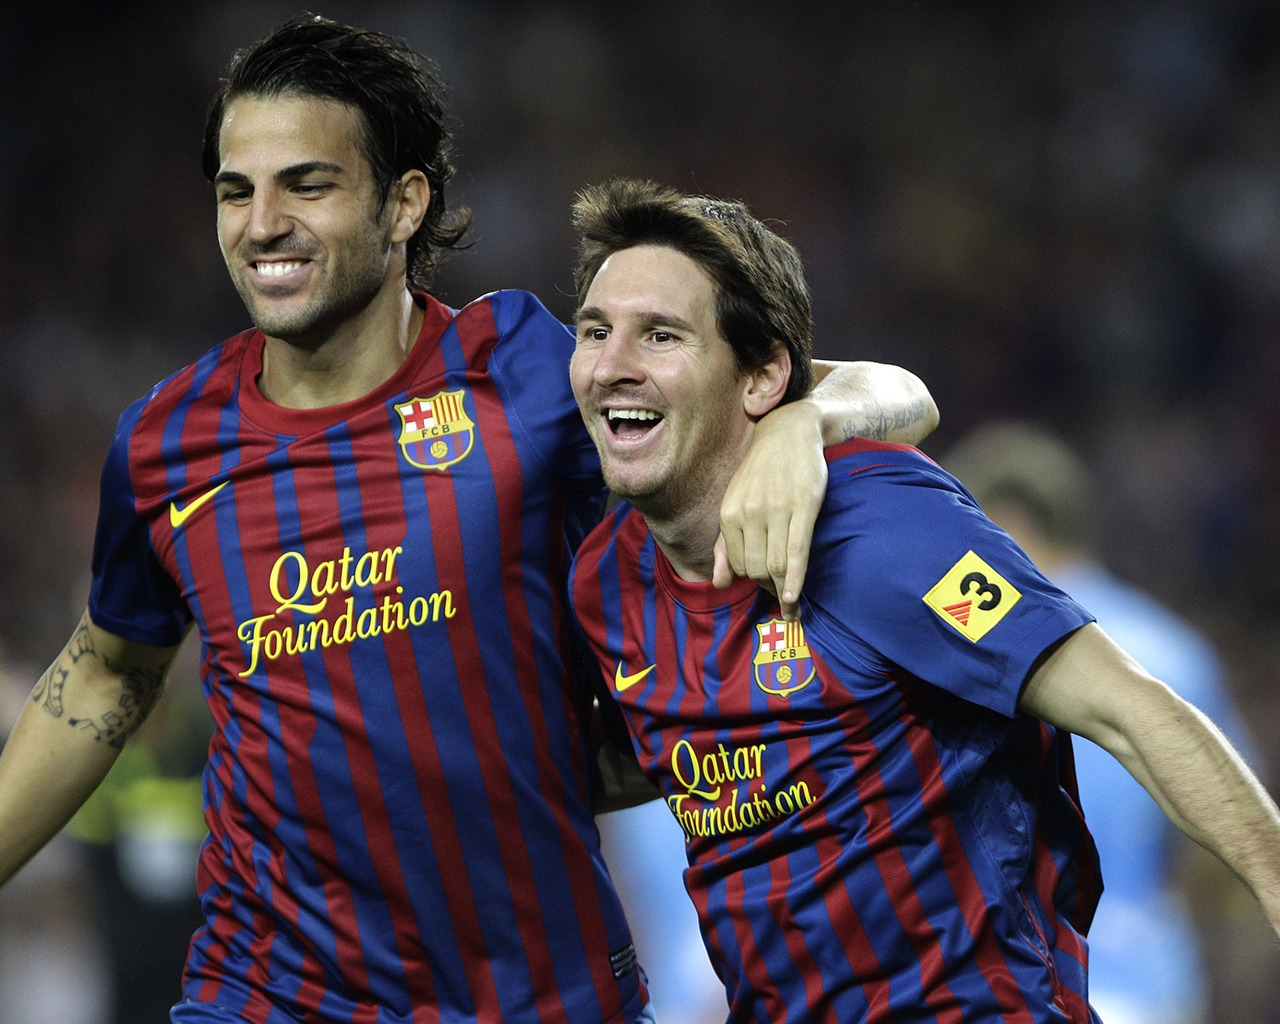 Cesc Fabregas and Lionel Messi for 1280 x 1024 resolution